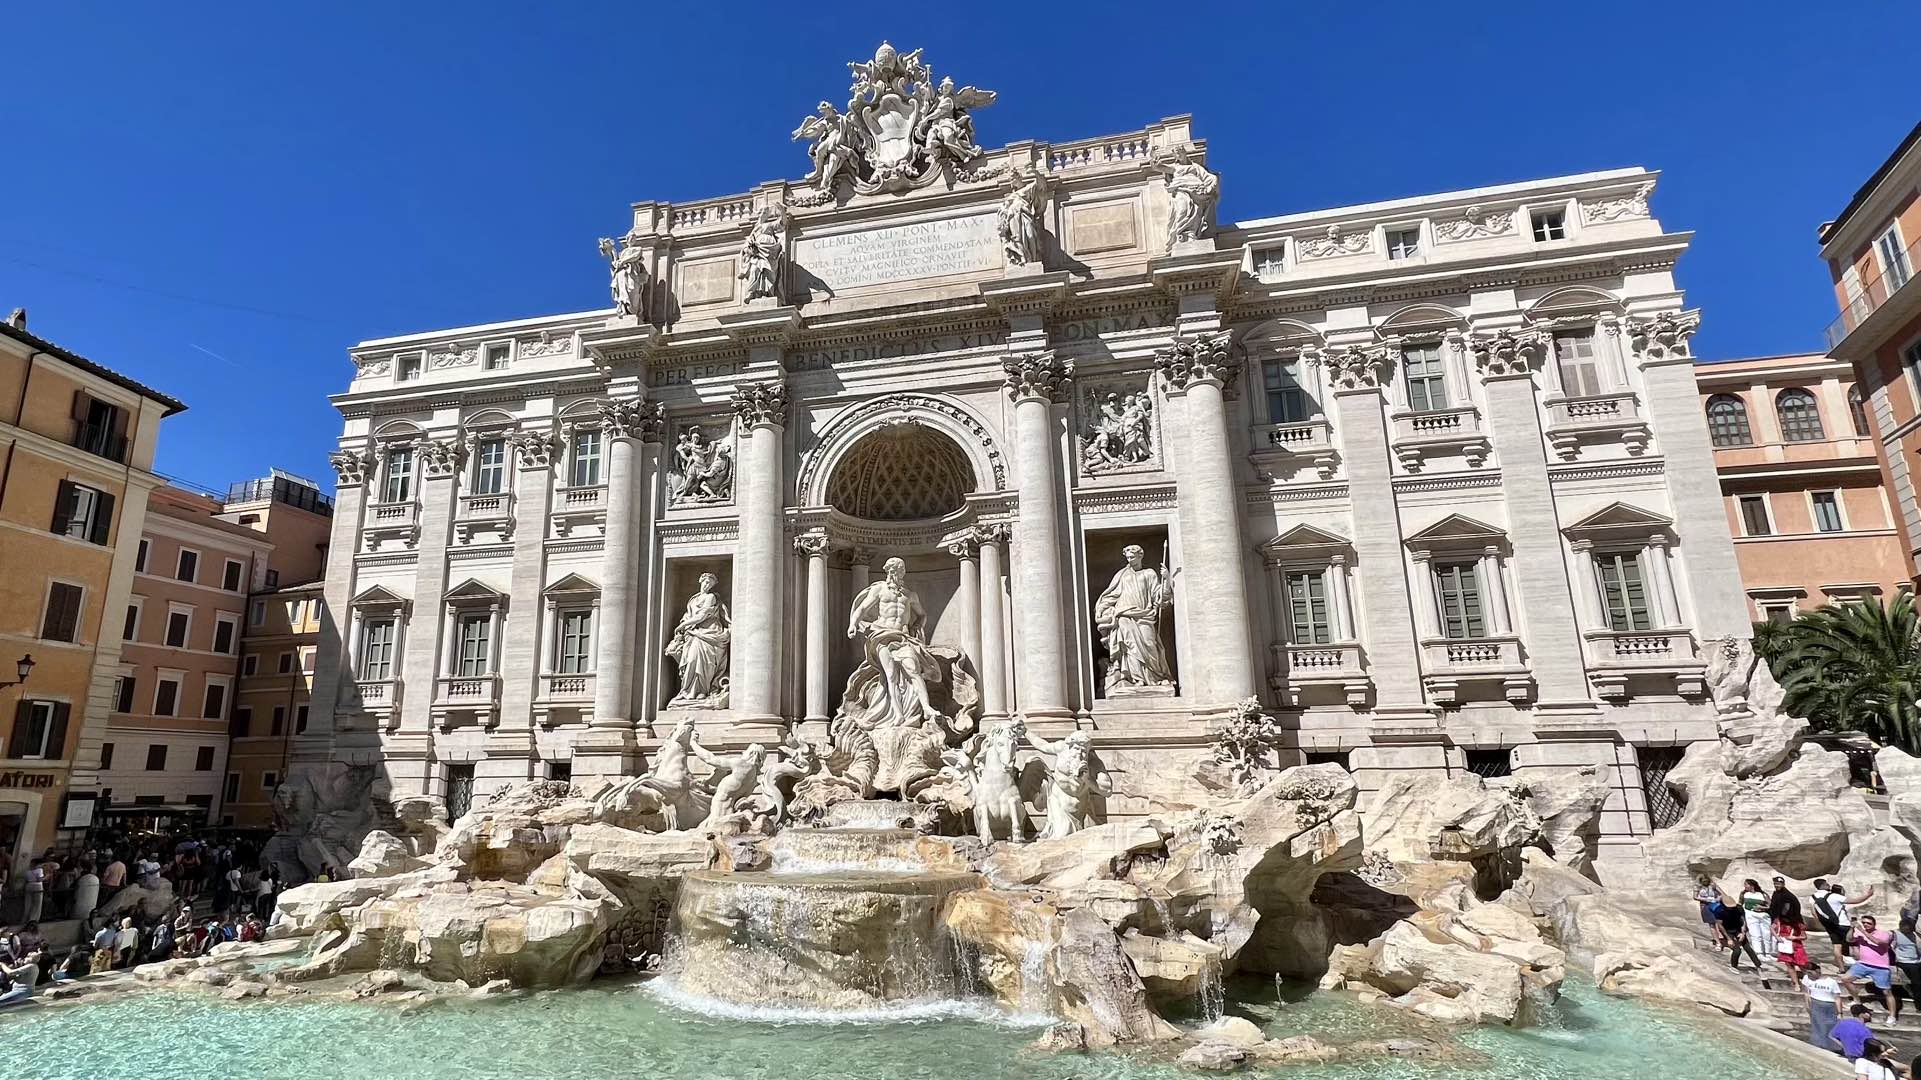 It’s never easy to walk away from the Trevi Fountain!